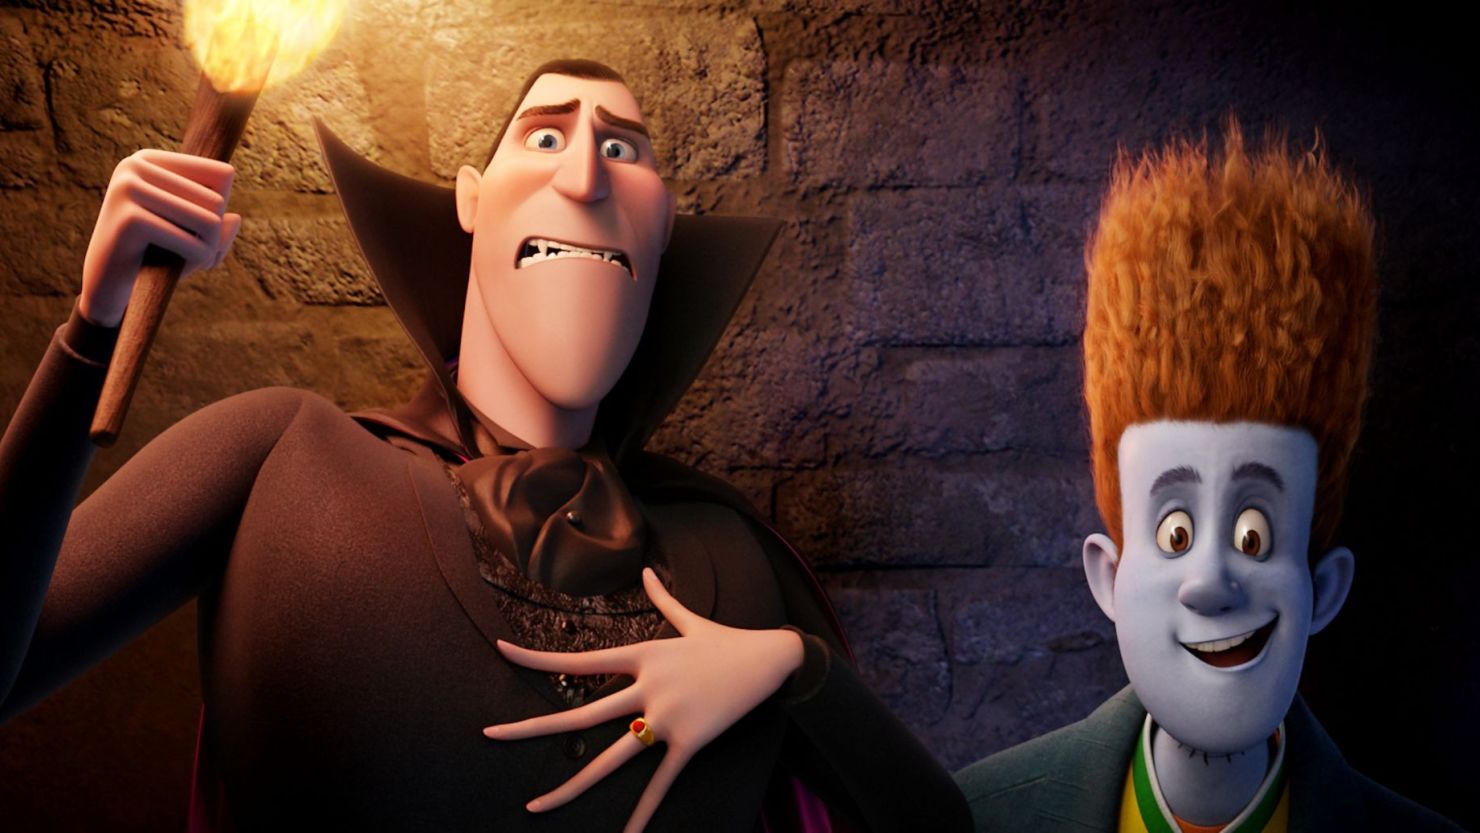 Dracula and Jonathan from "Hotel Transylvania" helped draw in audiences this weekend.